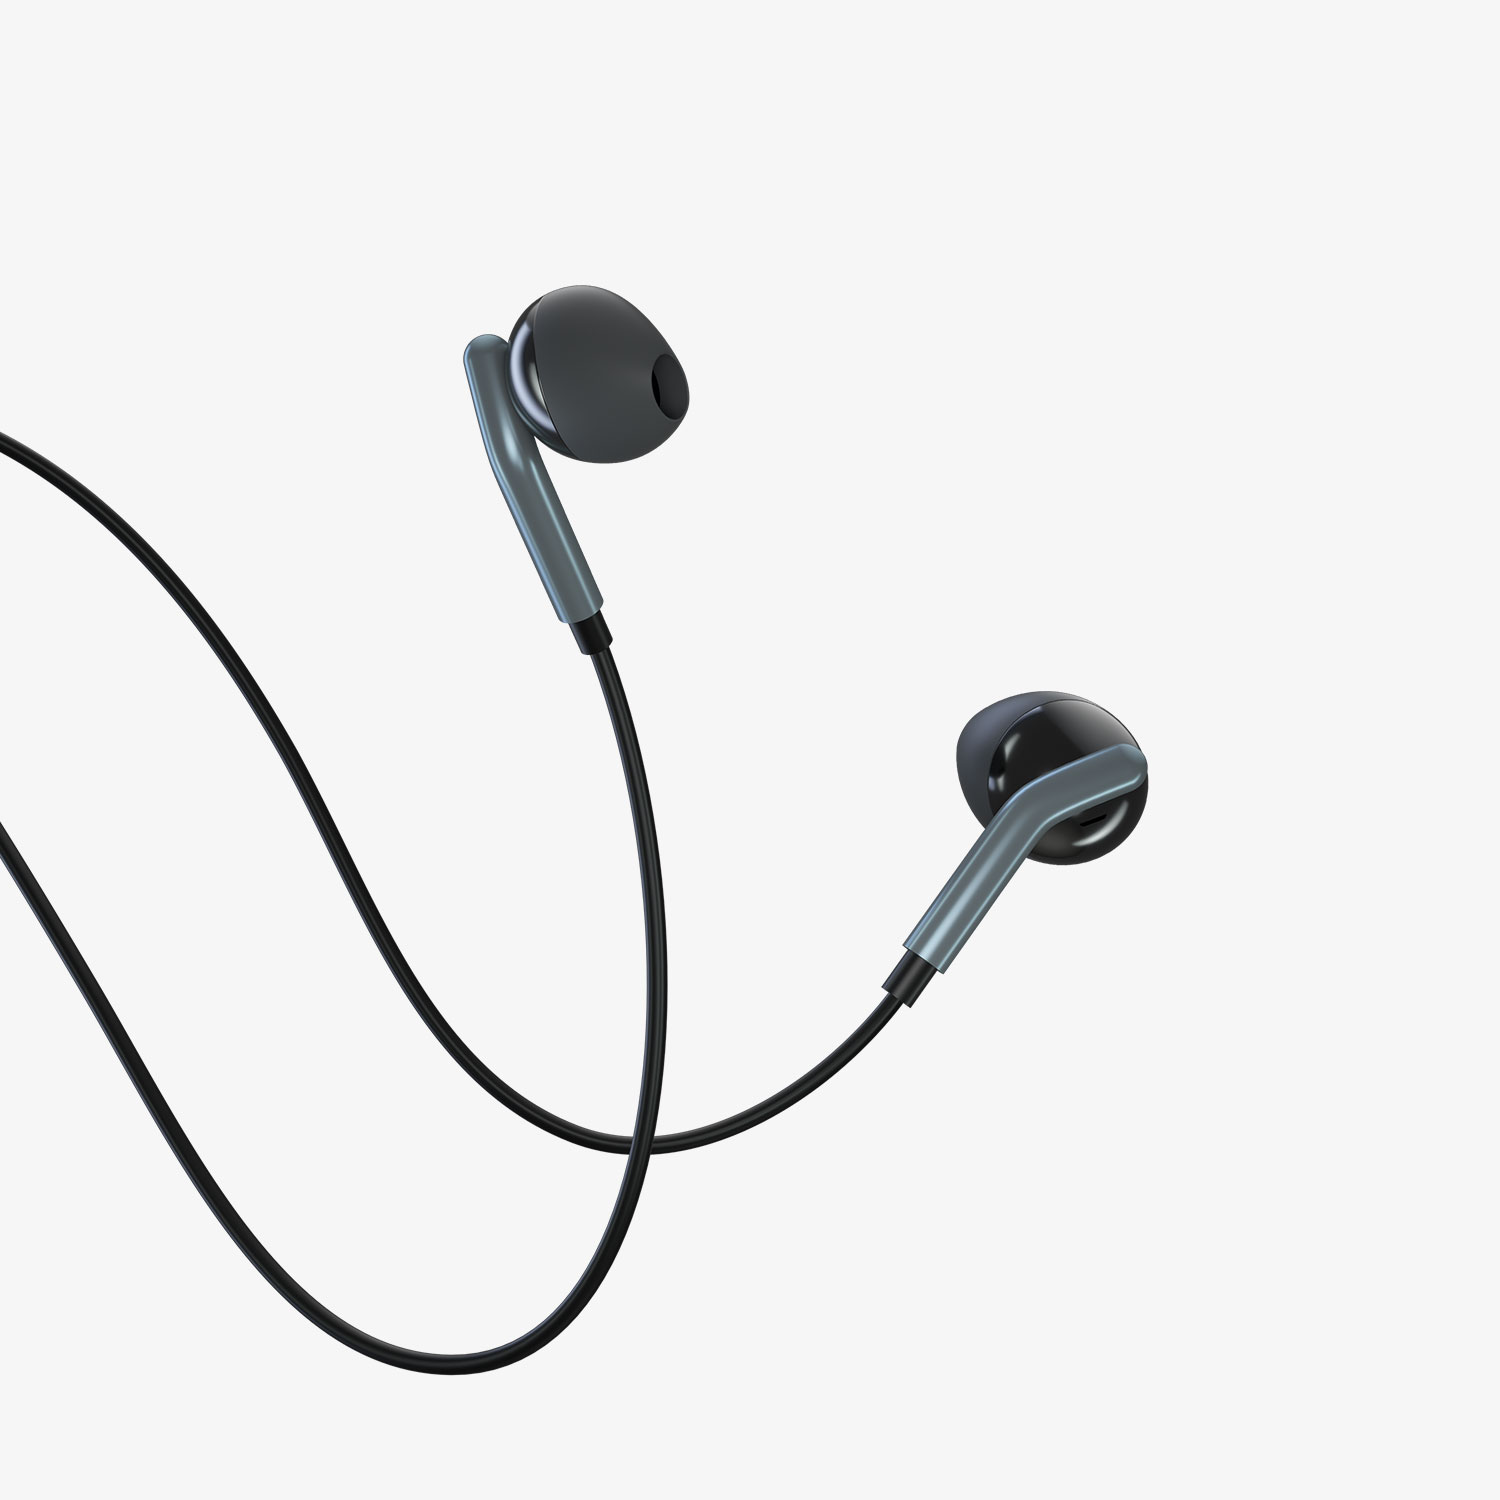 3.5mm Hi-Fi sound quality wired earphones